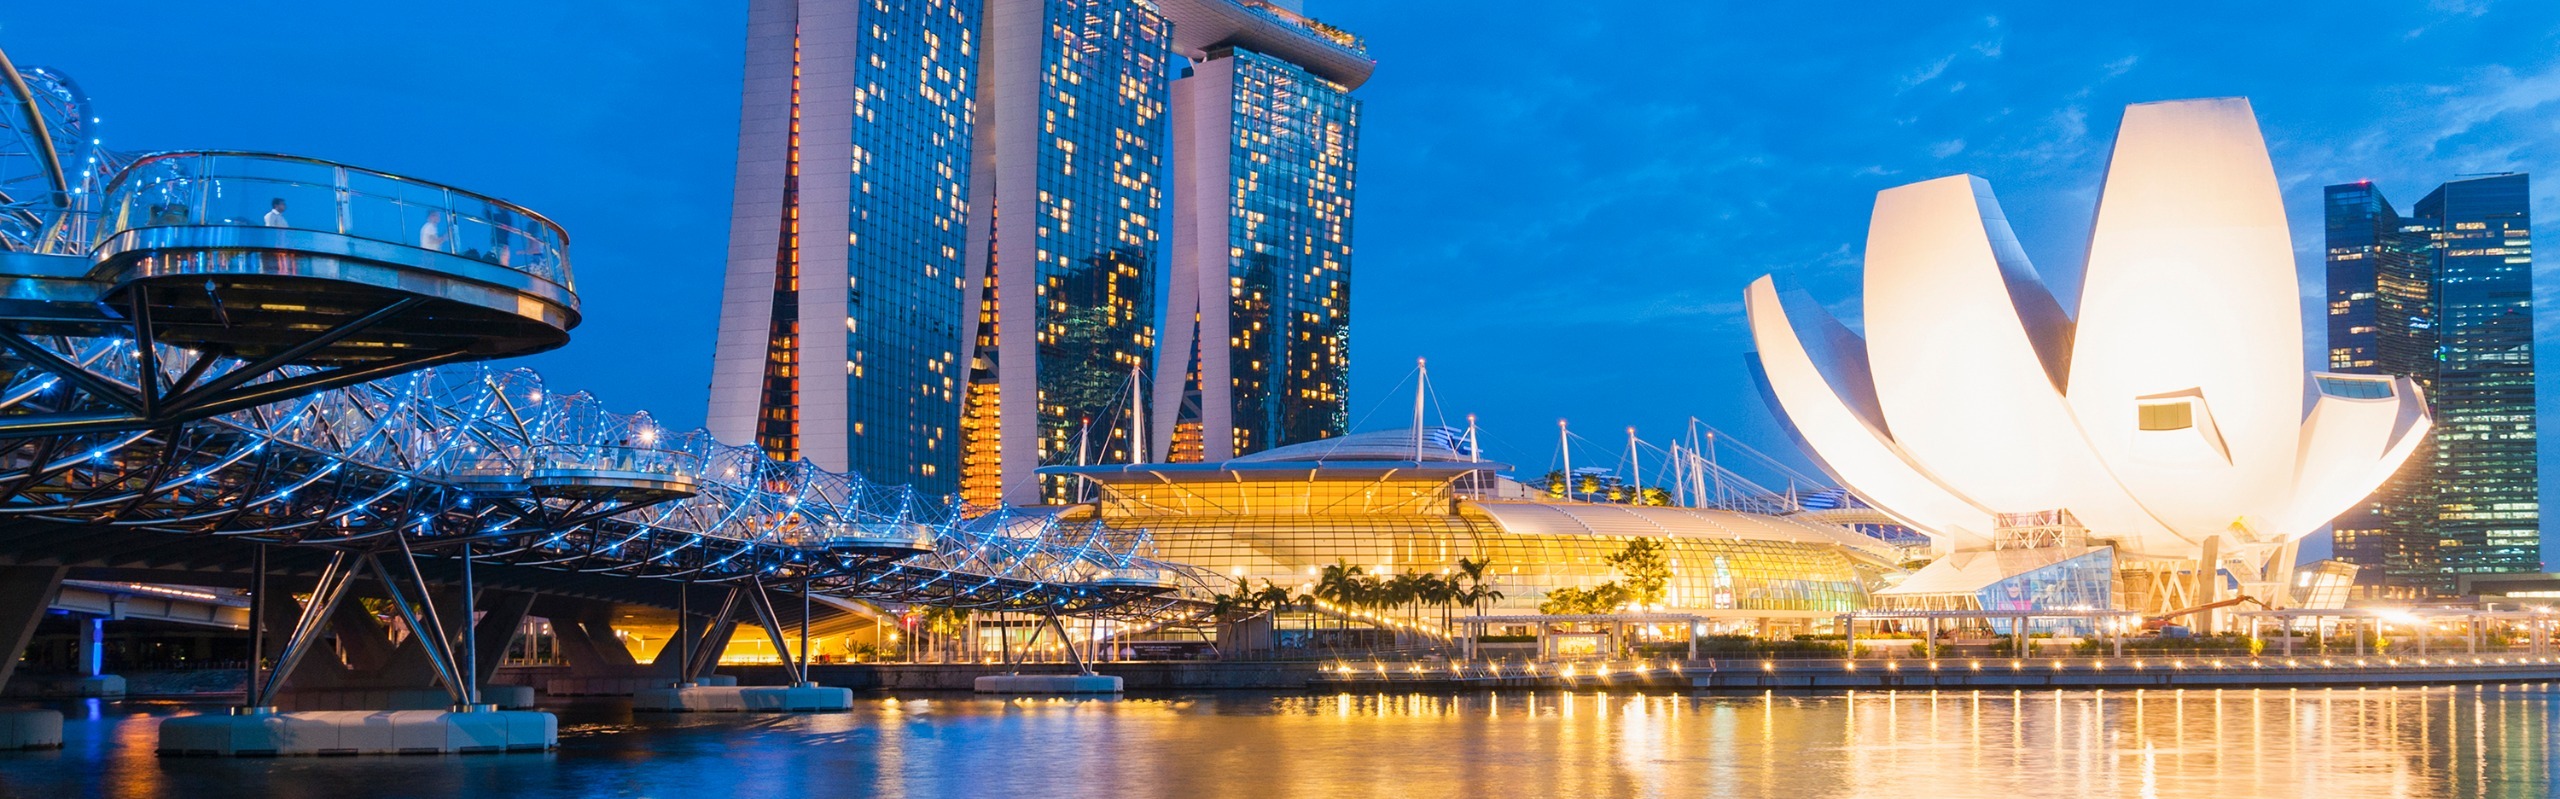 The Top 19 Interesting Things to Do in Singapore